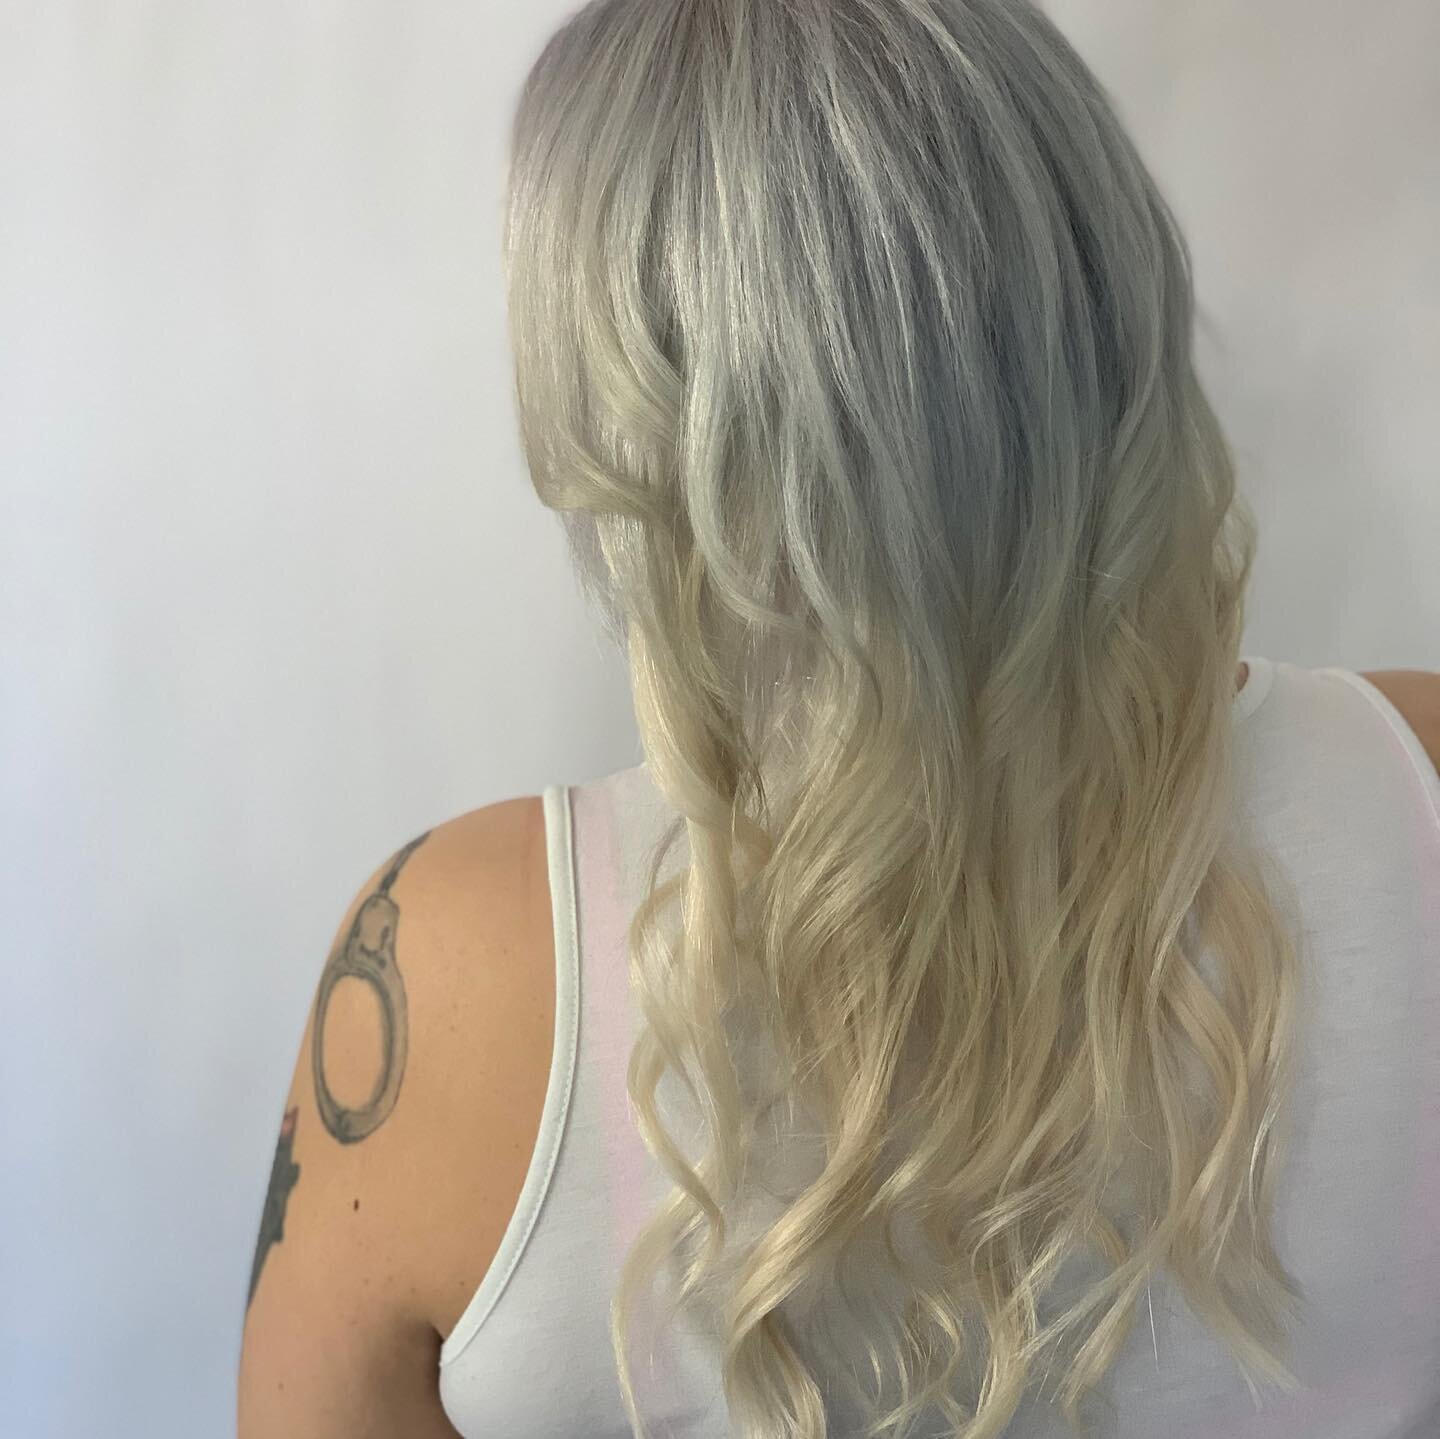 Sometimes we try and better ourselves and the side effects are unexpected. Could be hair loss, easily damaged hair, etc. extensions give women their hair back instantly. This woman is beautiful, strong and intelligent. I&rsquo;m so glad I could help 